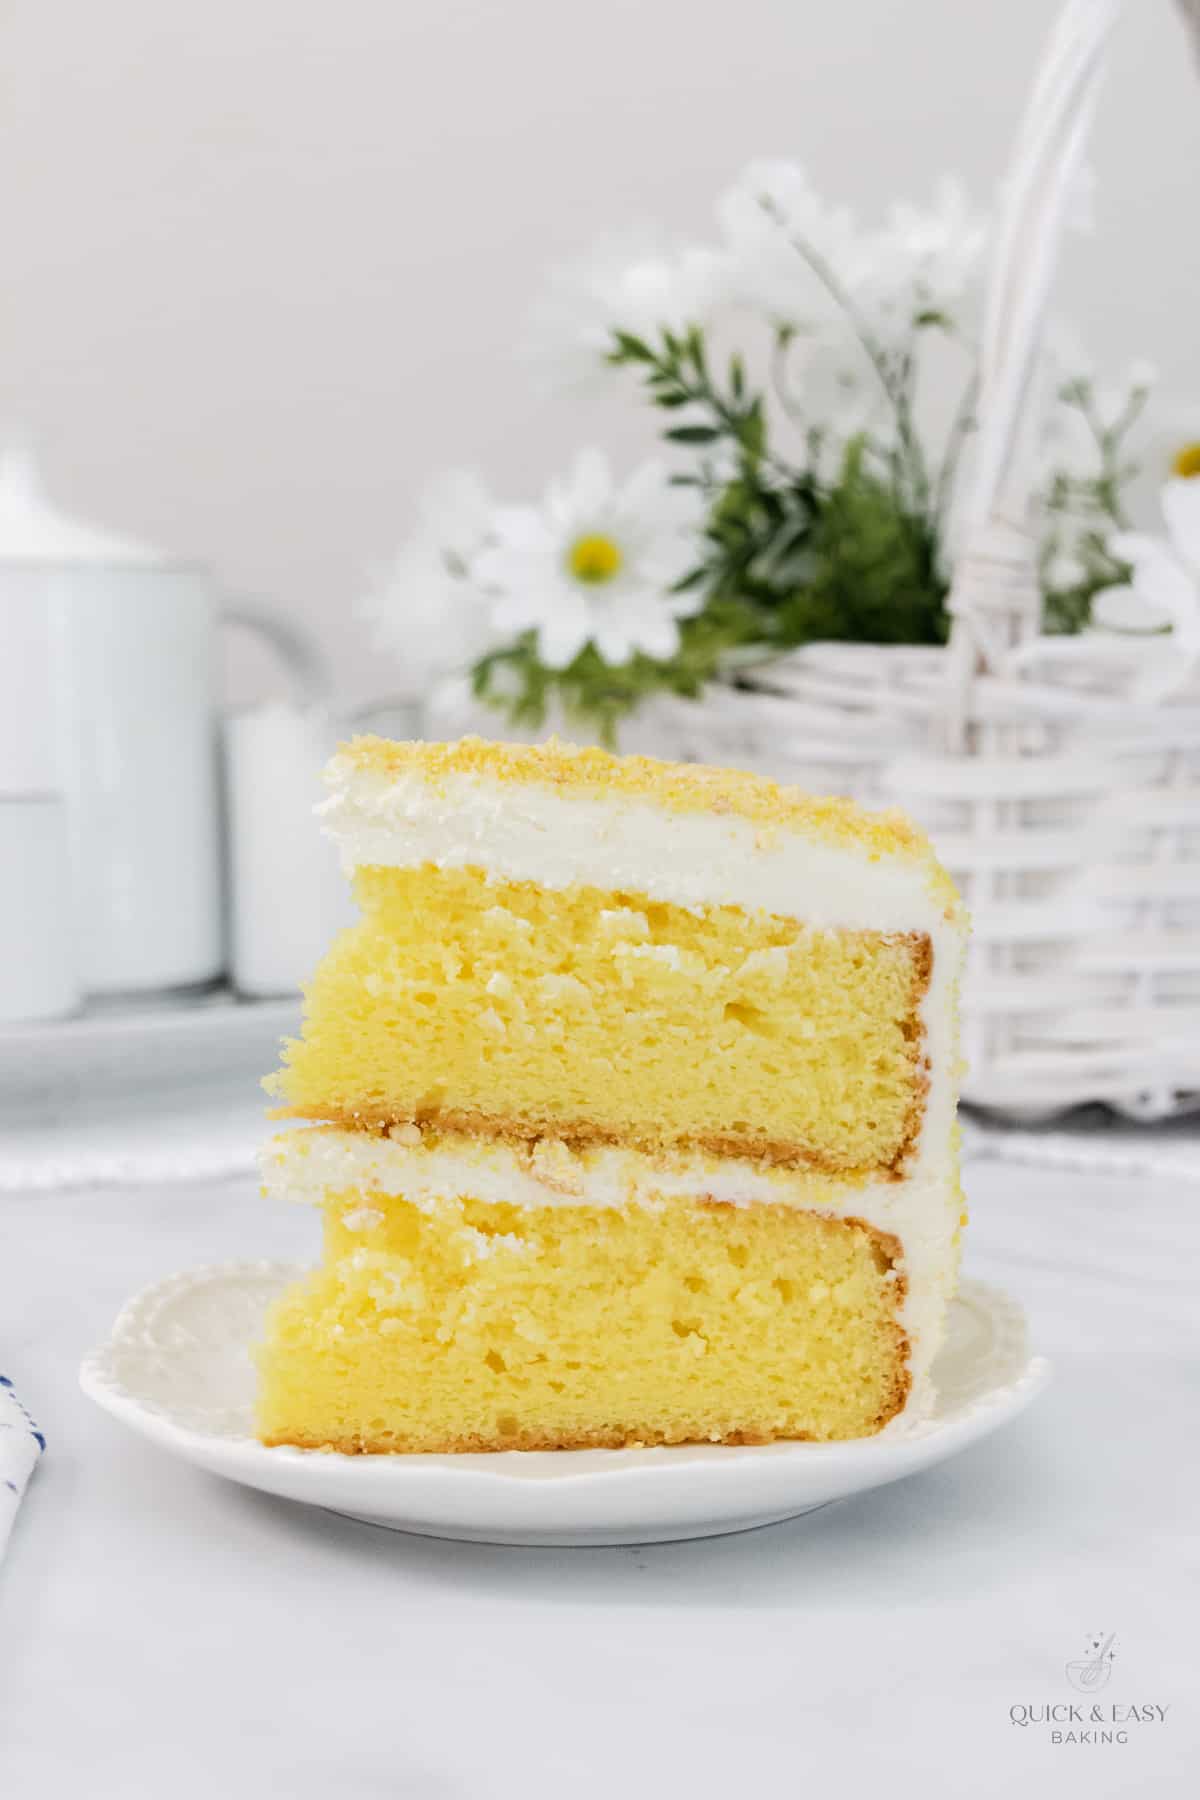 Tall slice of cake with lemon flavor and cream cheese frosting on a white plate.